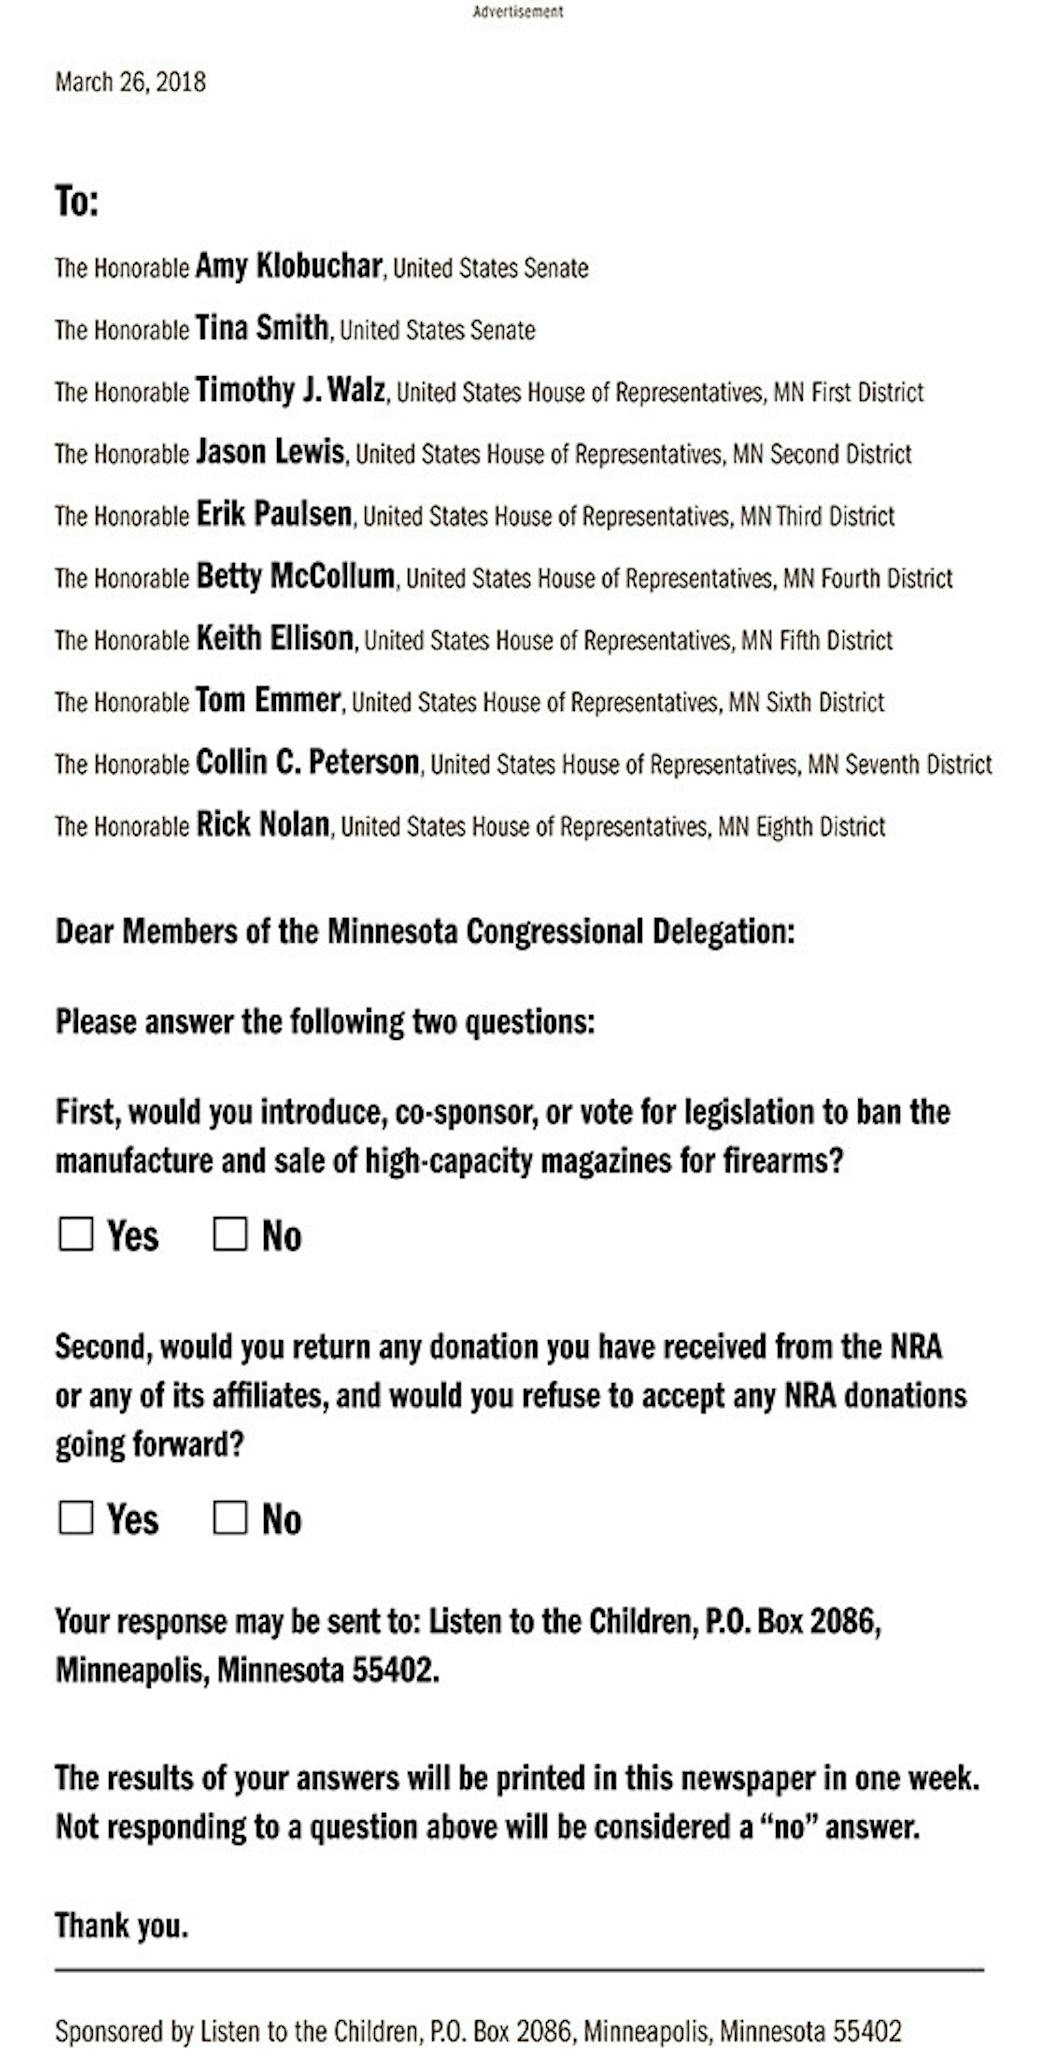 A full page ad supporting gun control measures paid for by a group called Listen to the Children appeared in Monday's print edition of the Star Tribune. 